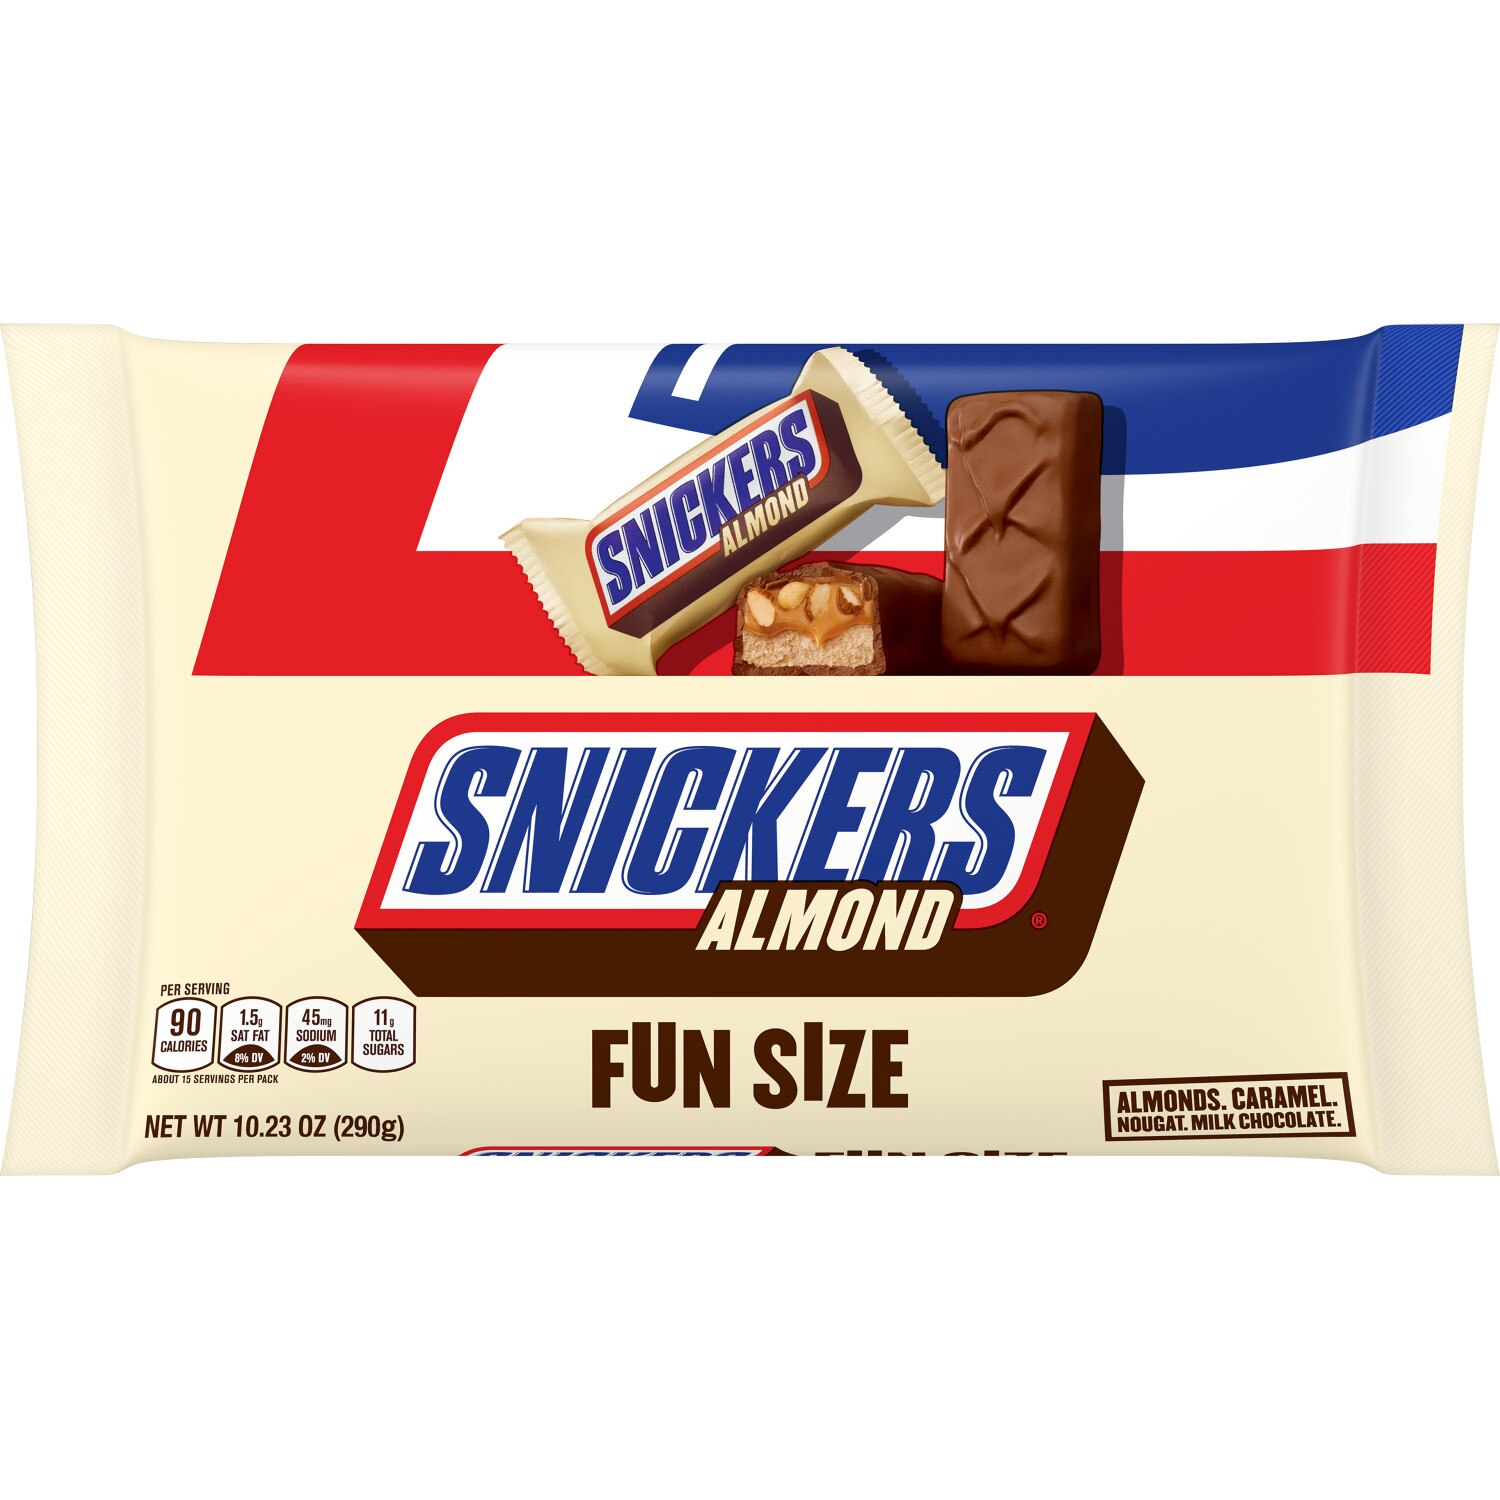 Snickers Almond Fun Size Chocolate Candy Bars, 10.23 OZ